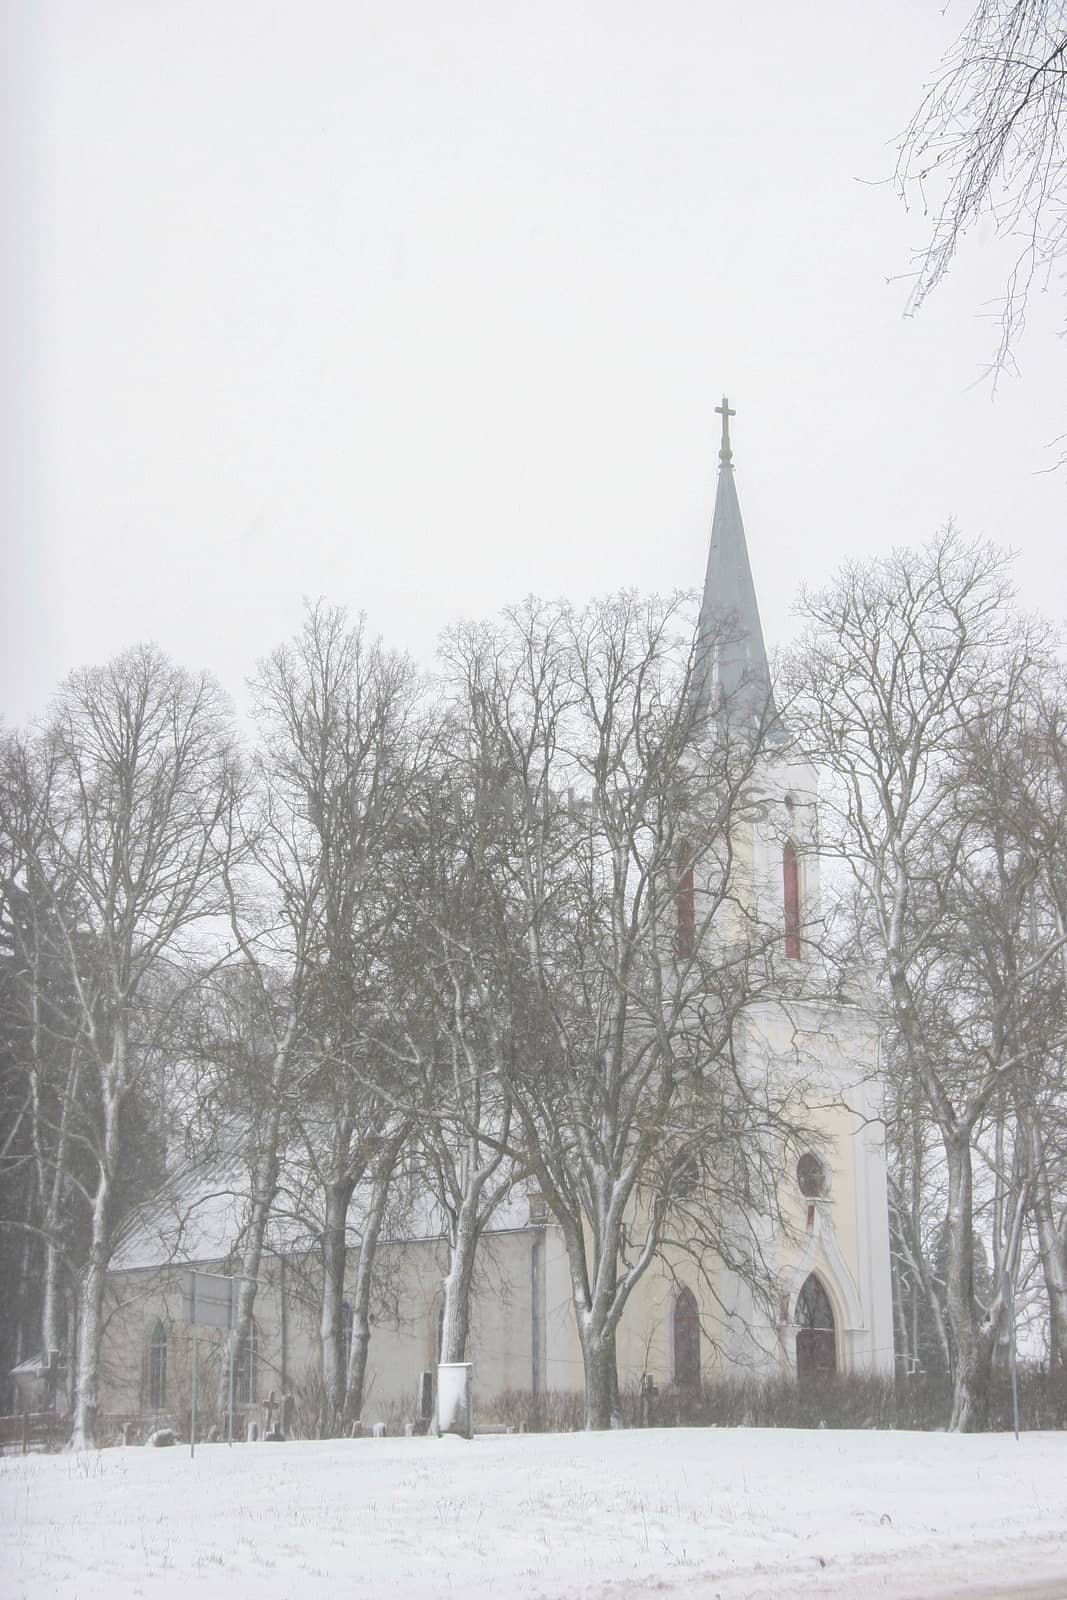 Church in snowfall. Winter in Barbele, Latvia. Church covered in snow. Winter landscape with snow covered church and trees.

